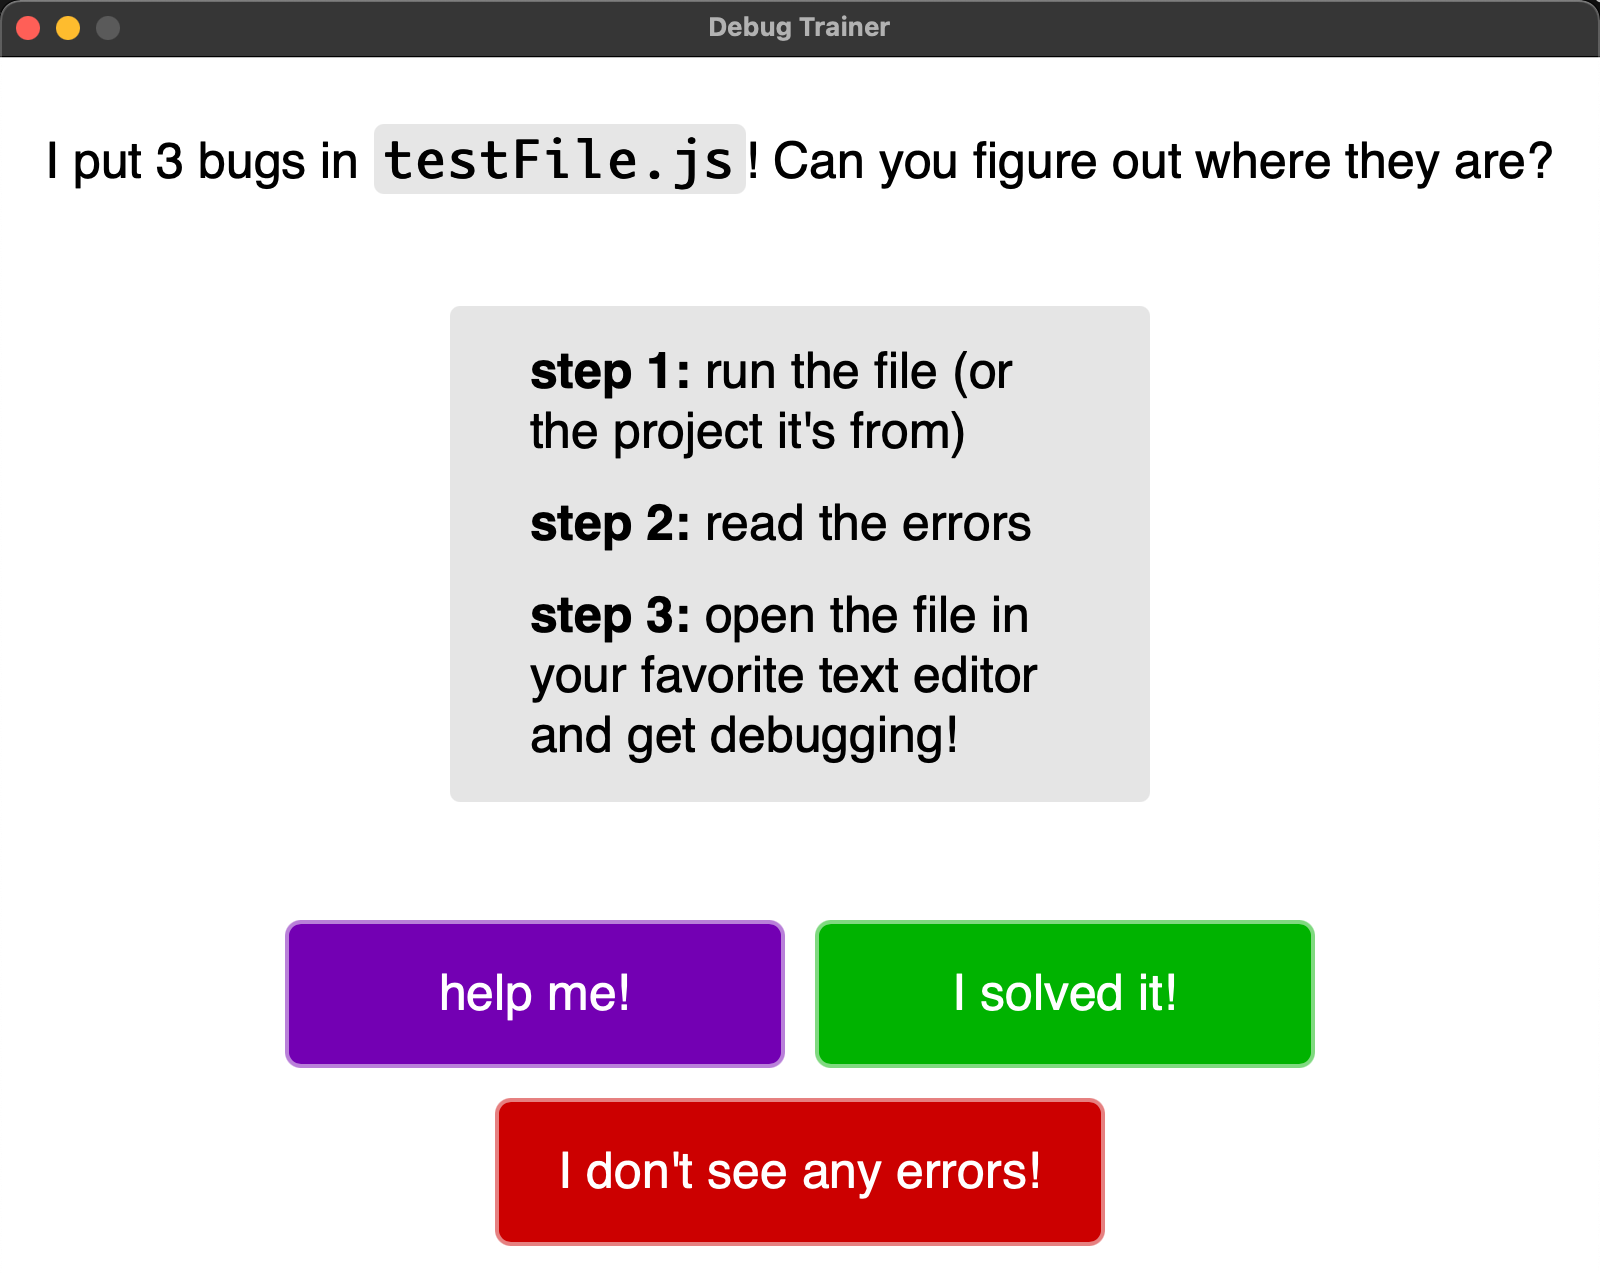 The main page of the Debug Trainer app; text reads “I put 3 bugs into testFile.js; can you figure out where they are?”, and then shows a set of step-by-step instructions for figuring it out.